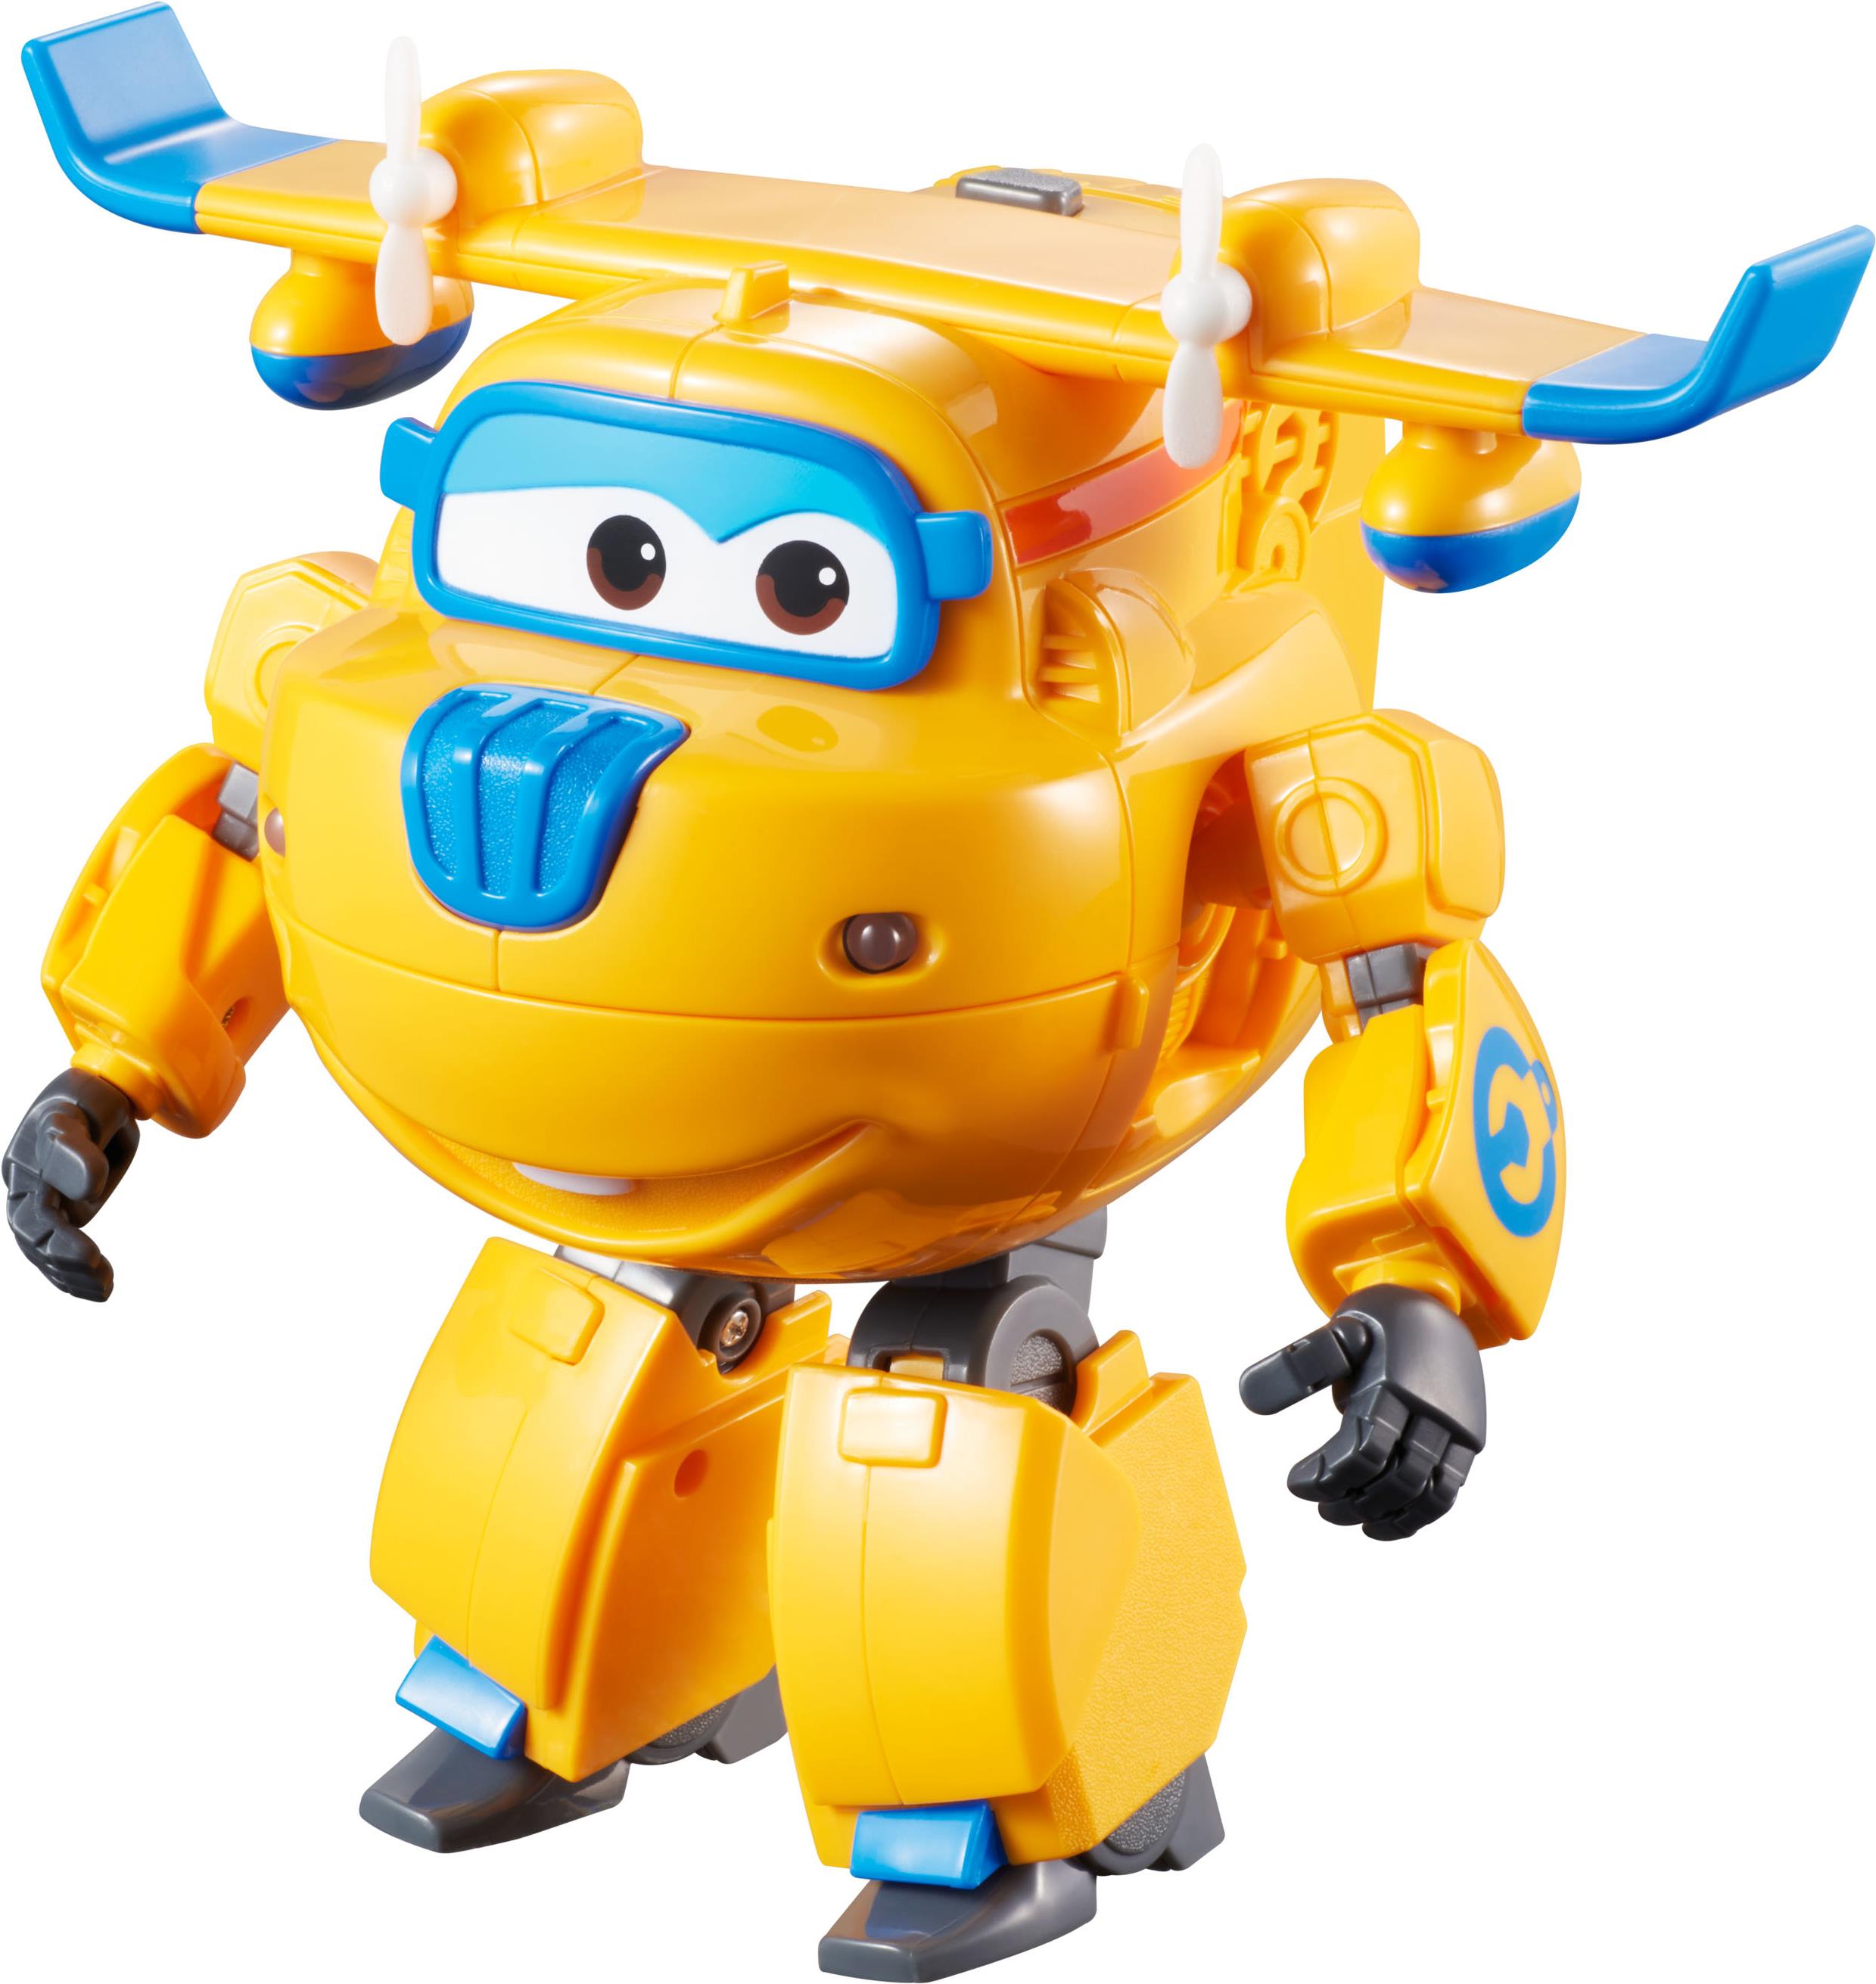 Alpha Animation & Toys Super Wings Transform n Talk Donnie - Blau - Orange - 4 Jahr(e) - 9 Jahr(e) - Junge/Mädchen - 12 Stück(e) - Innenraum (YW710320)